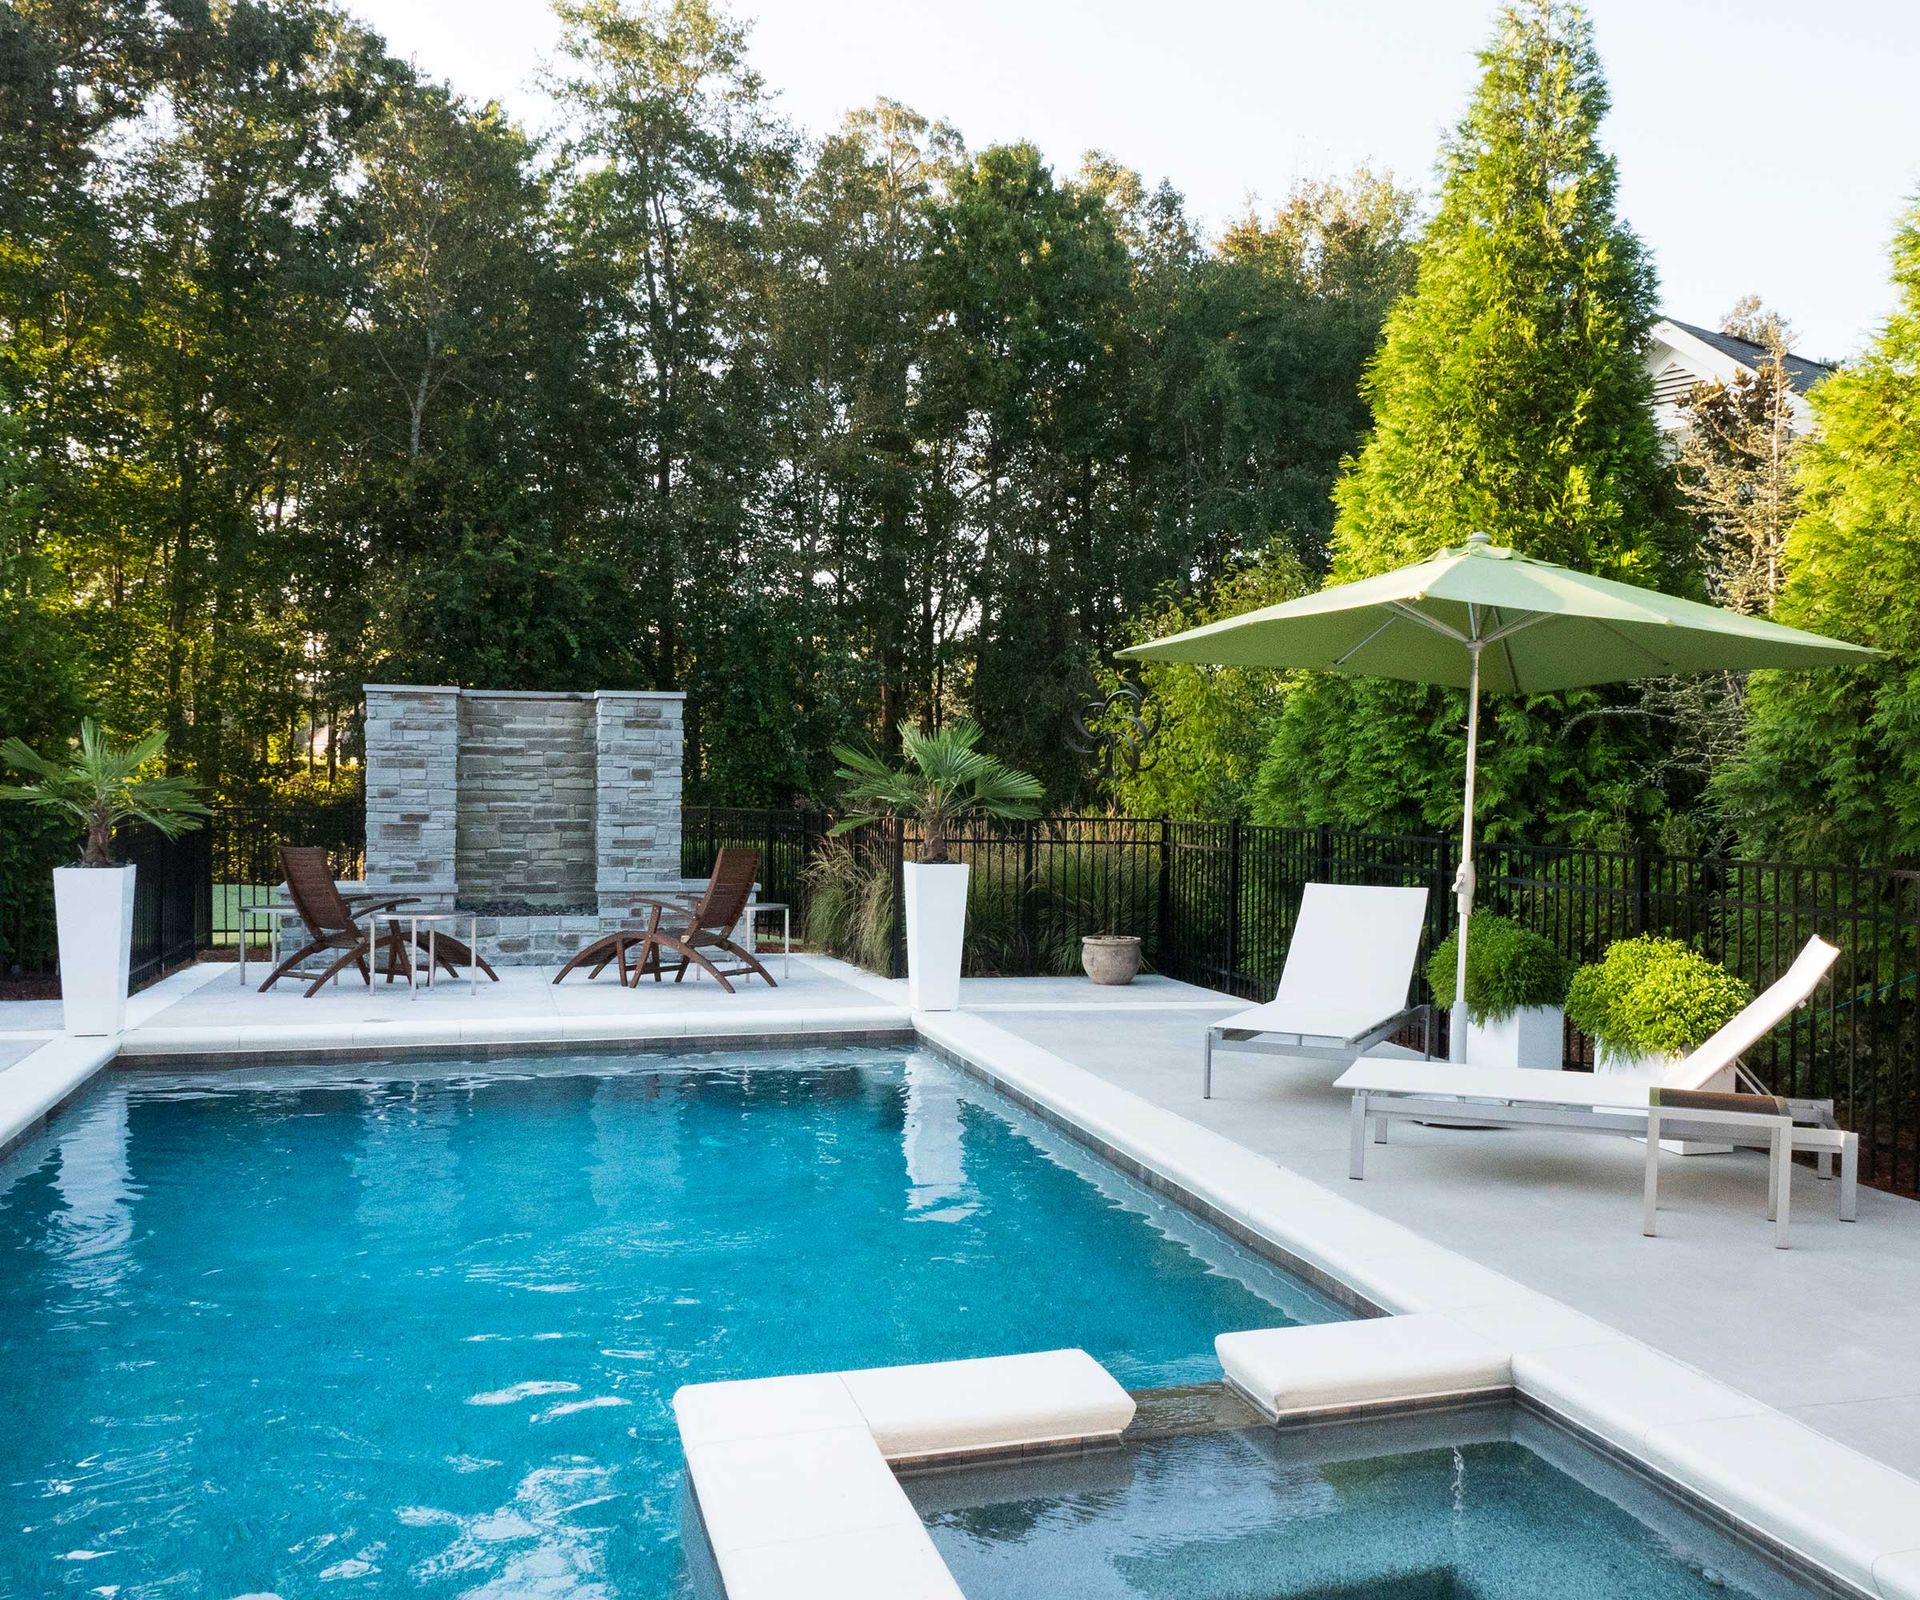 Pool maintenance: how to look after a backyard pool